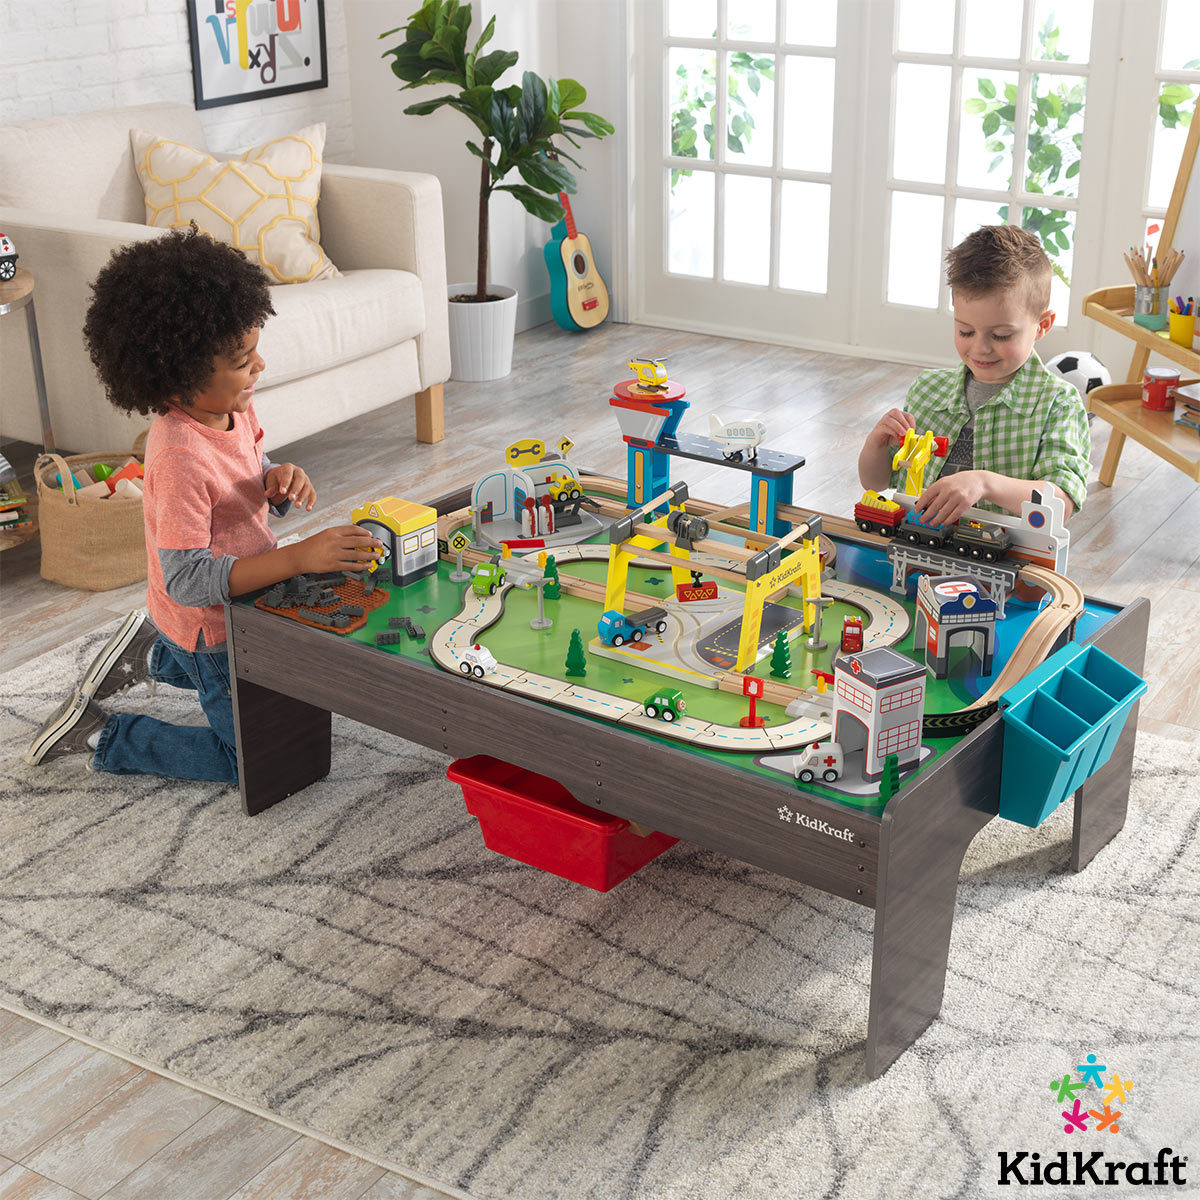 KidKraft My Own City Vehicle And Activity Table With EZ Kraft Assembly (3+ Years)